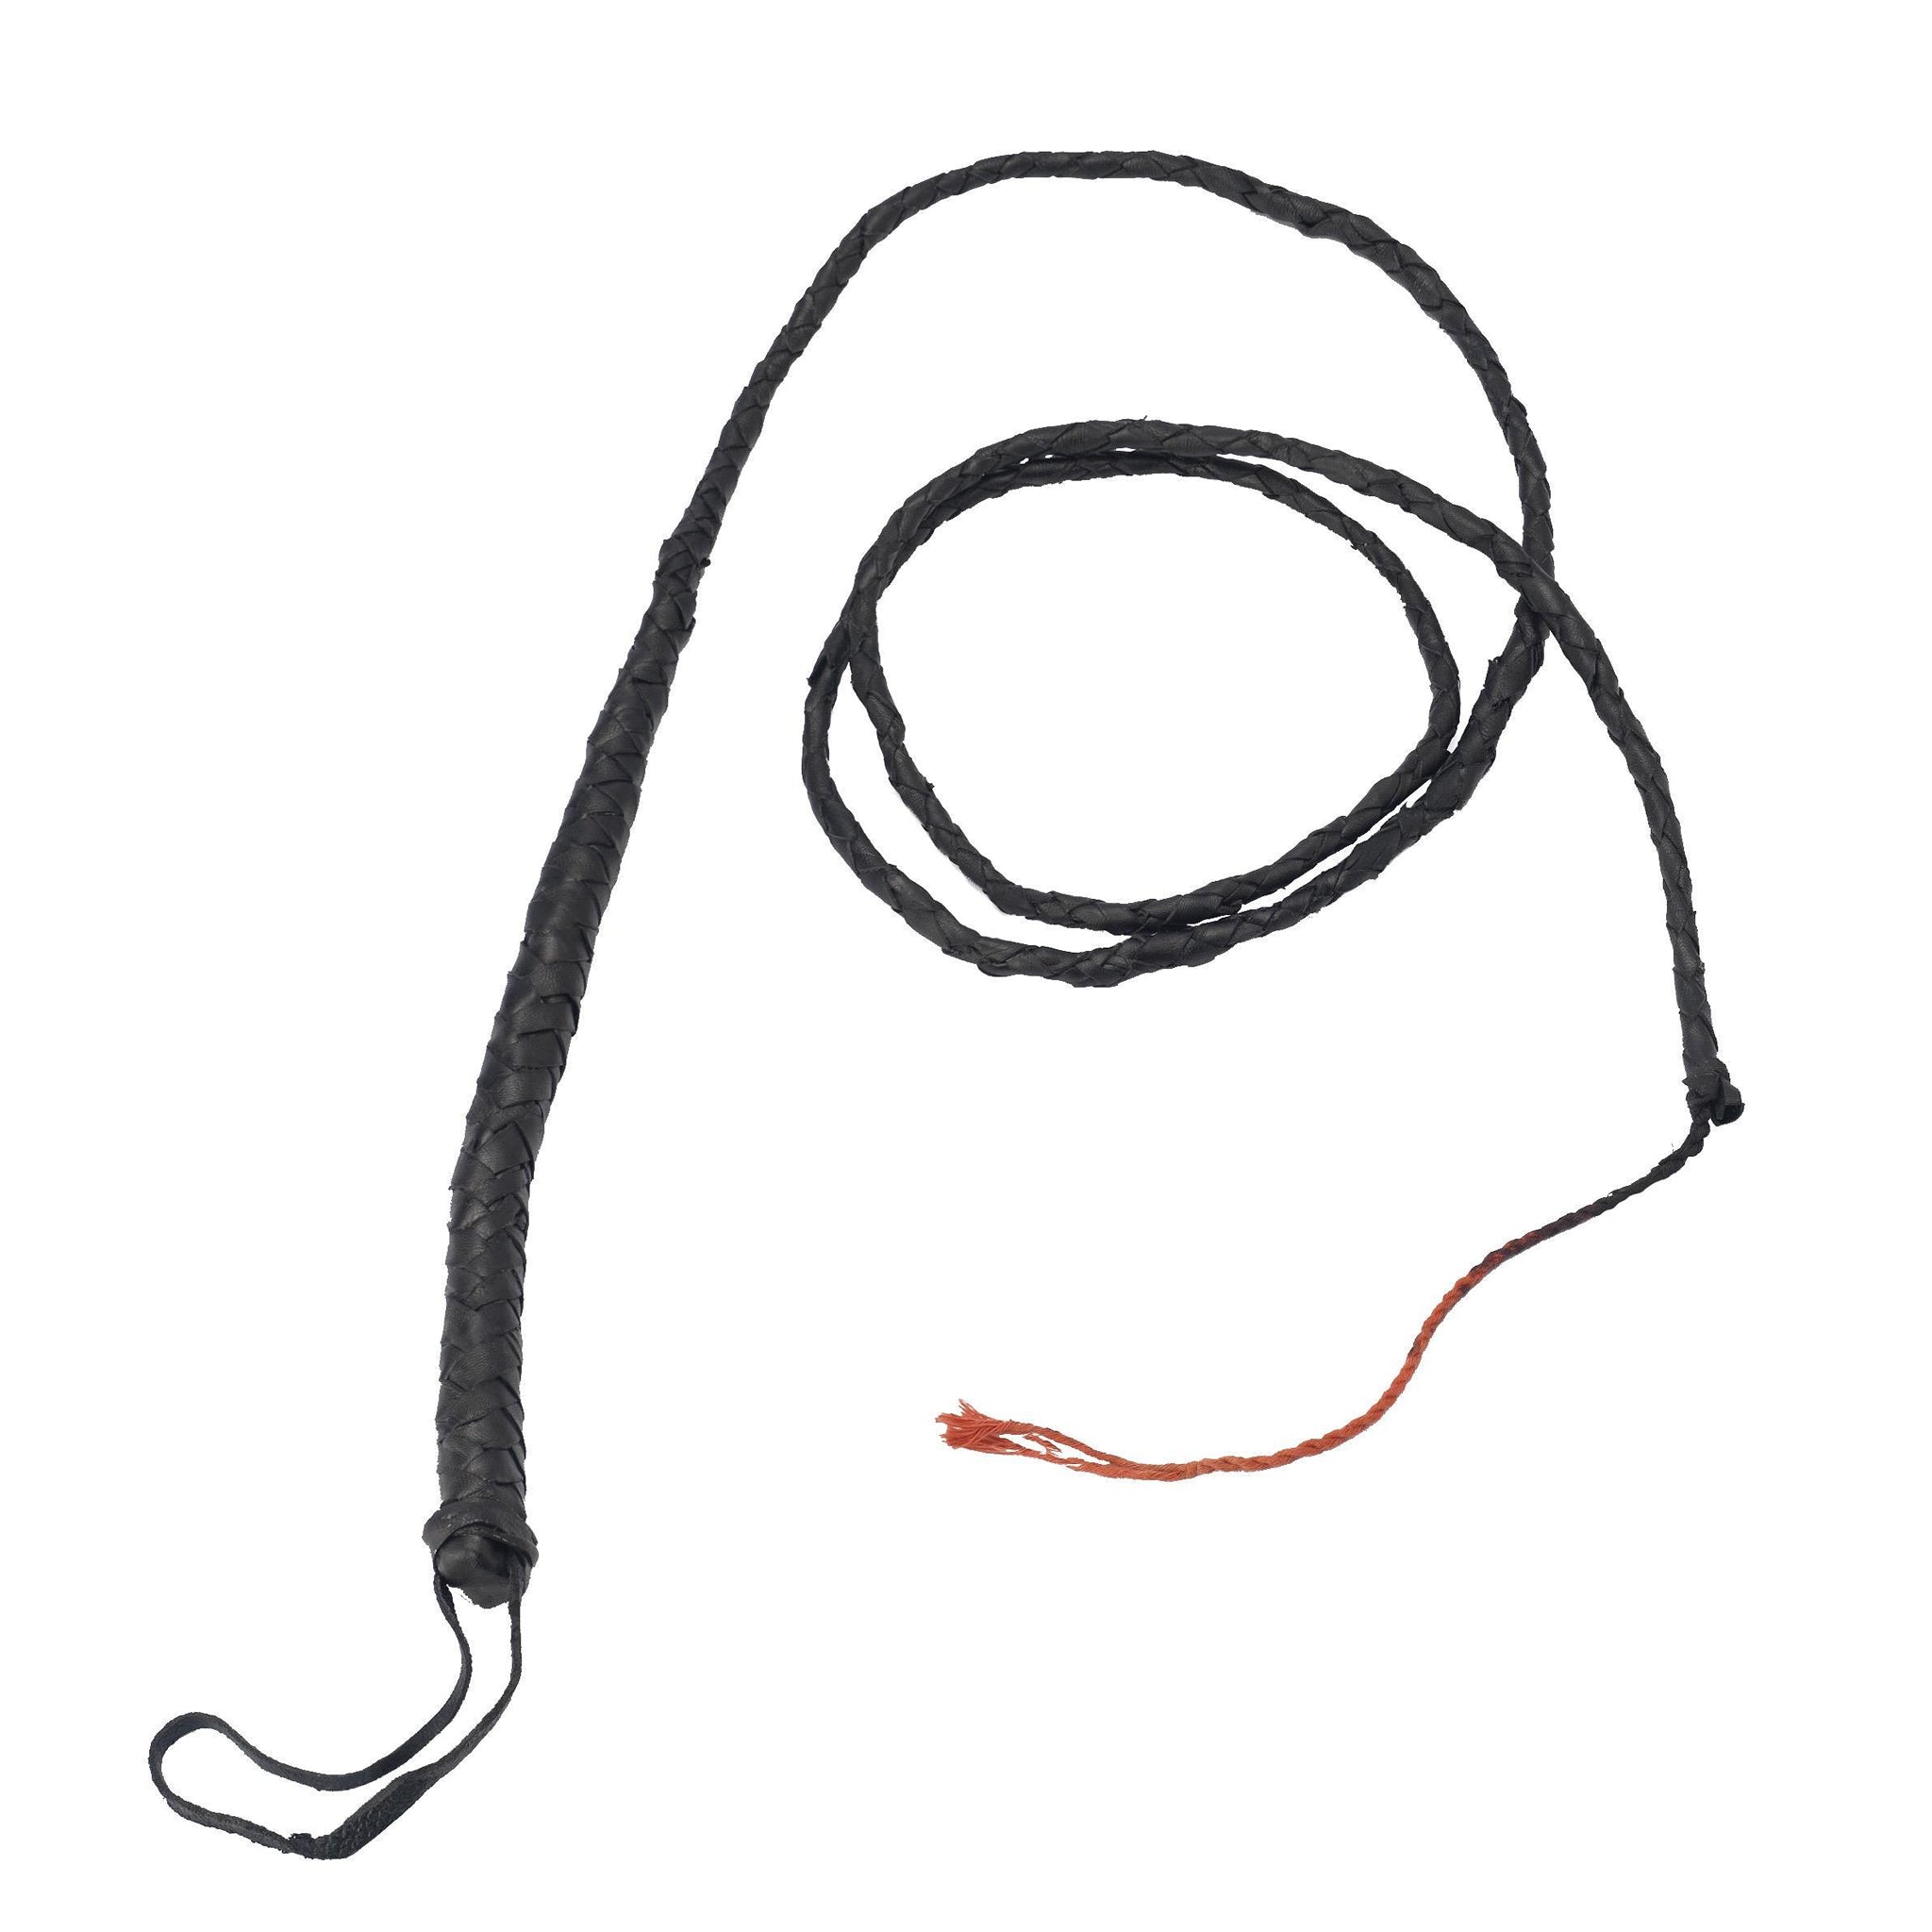 Long black bull whip with red tip